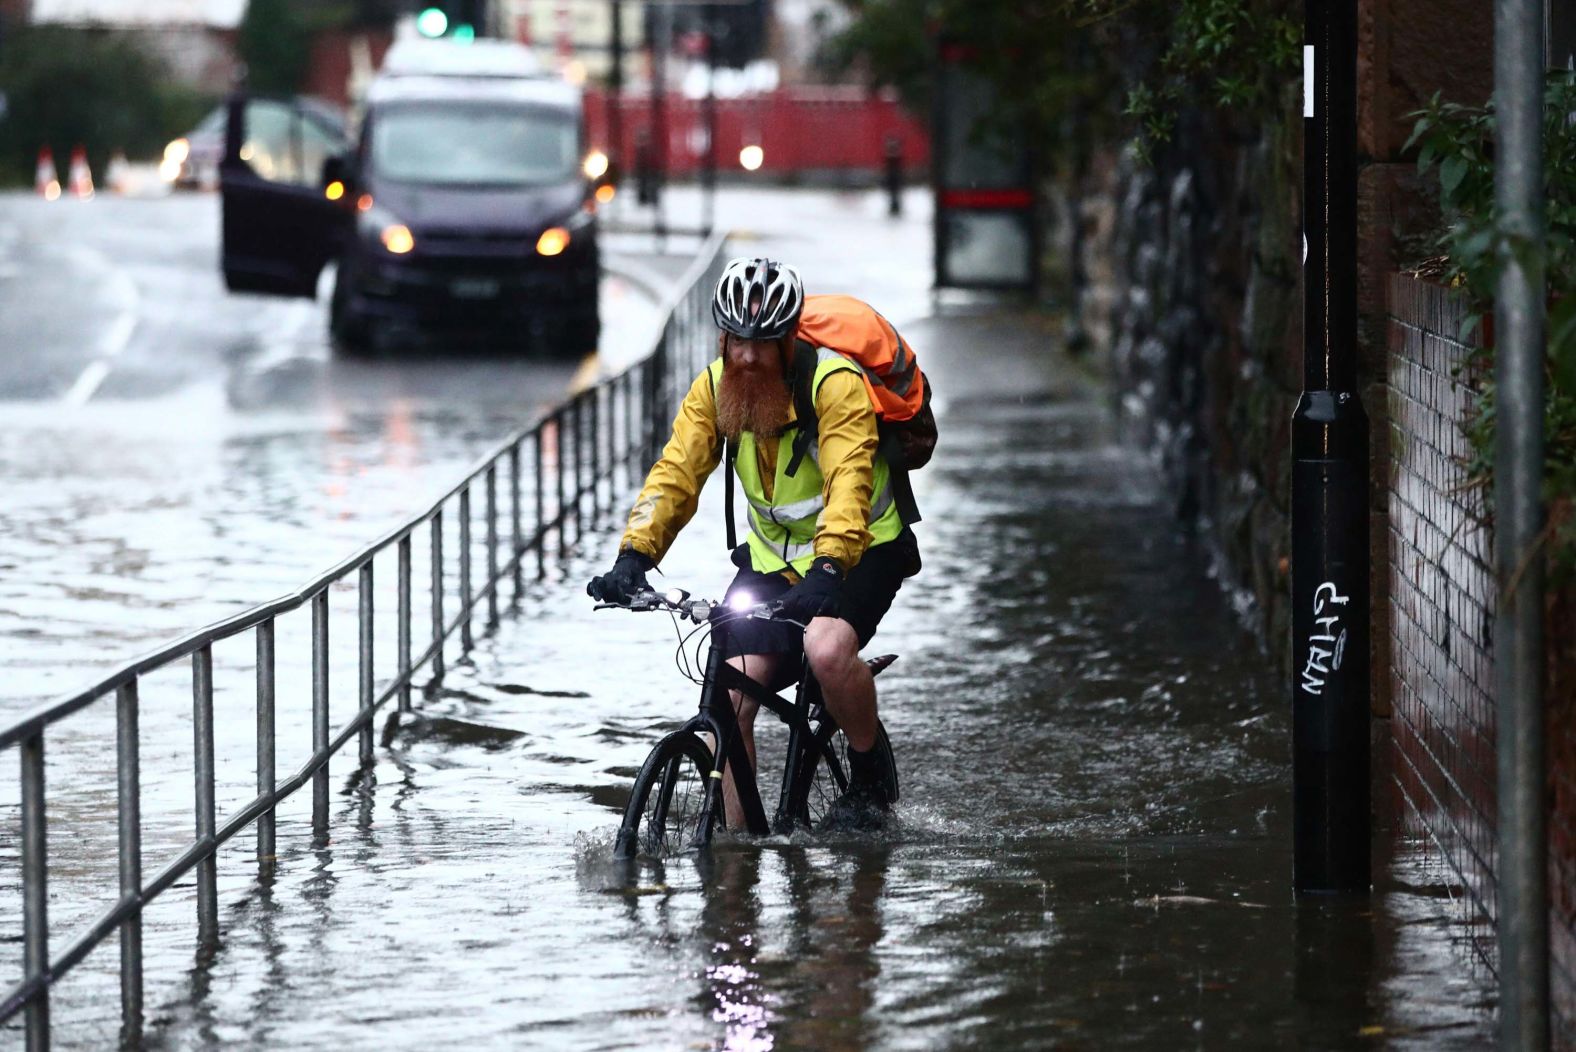 A man cycles through a flooded street in Sheffield, England, on Thursday, November 7.